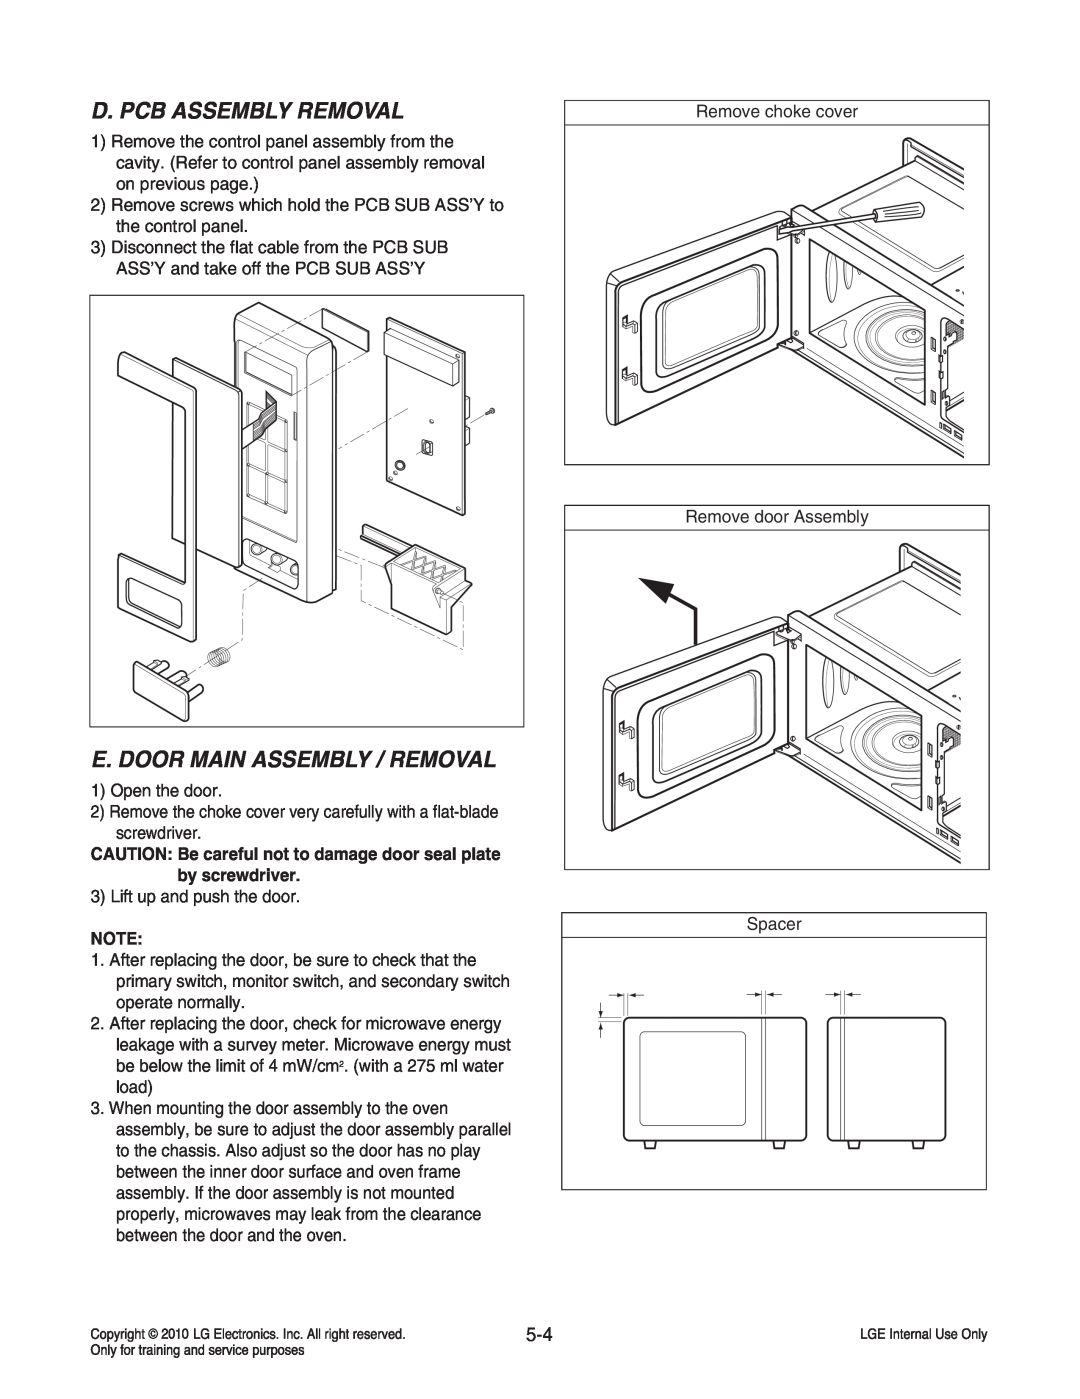 Frigidaire LCRT2010ST service manual D. Pcb Assembly Removal, E. Door Main Assembly / Removal 